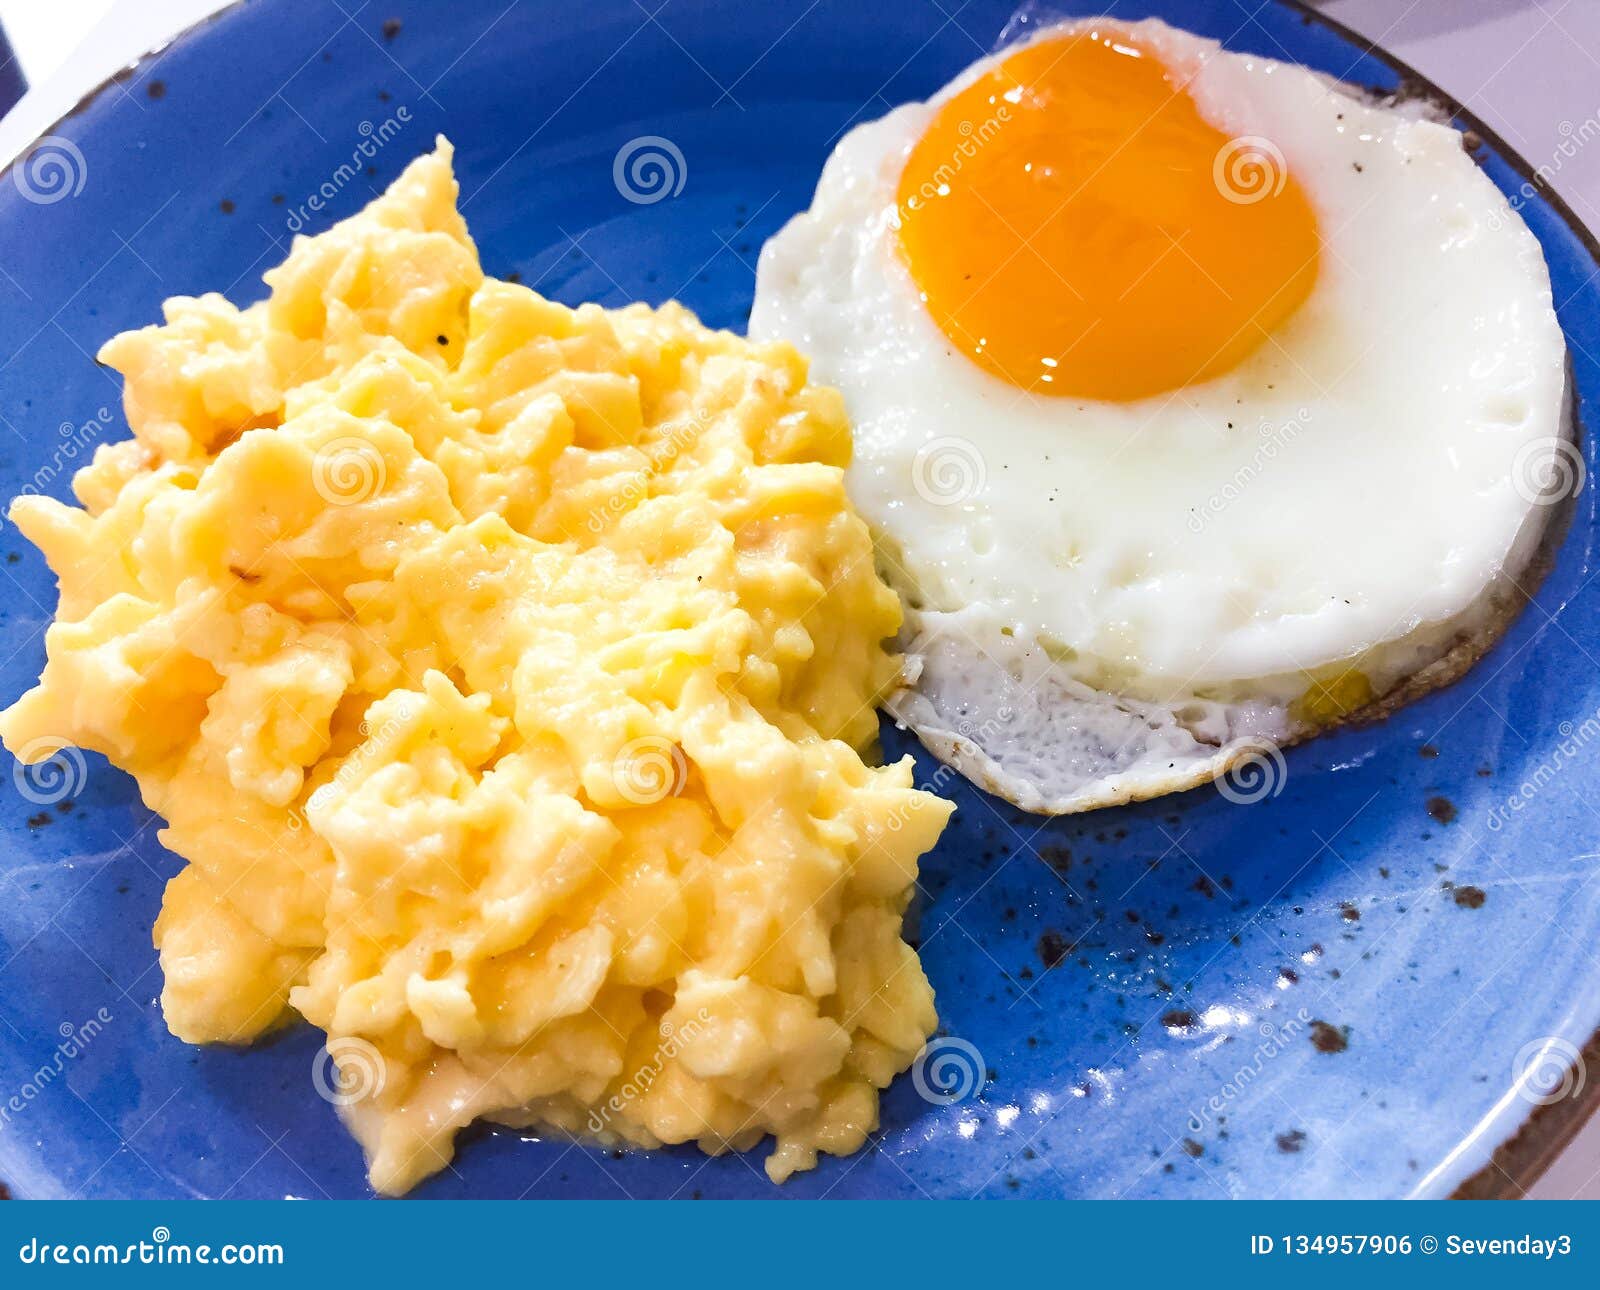 Breakfast Scrambled Eggs With Chees And Medium Fried Egg That Was Placed On The Blue Dish Stock Photo Image Of Life Food